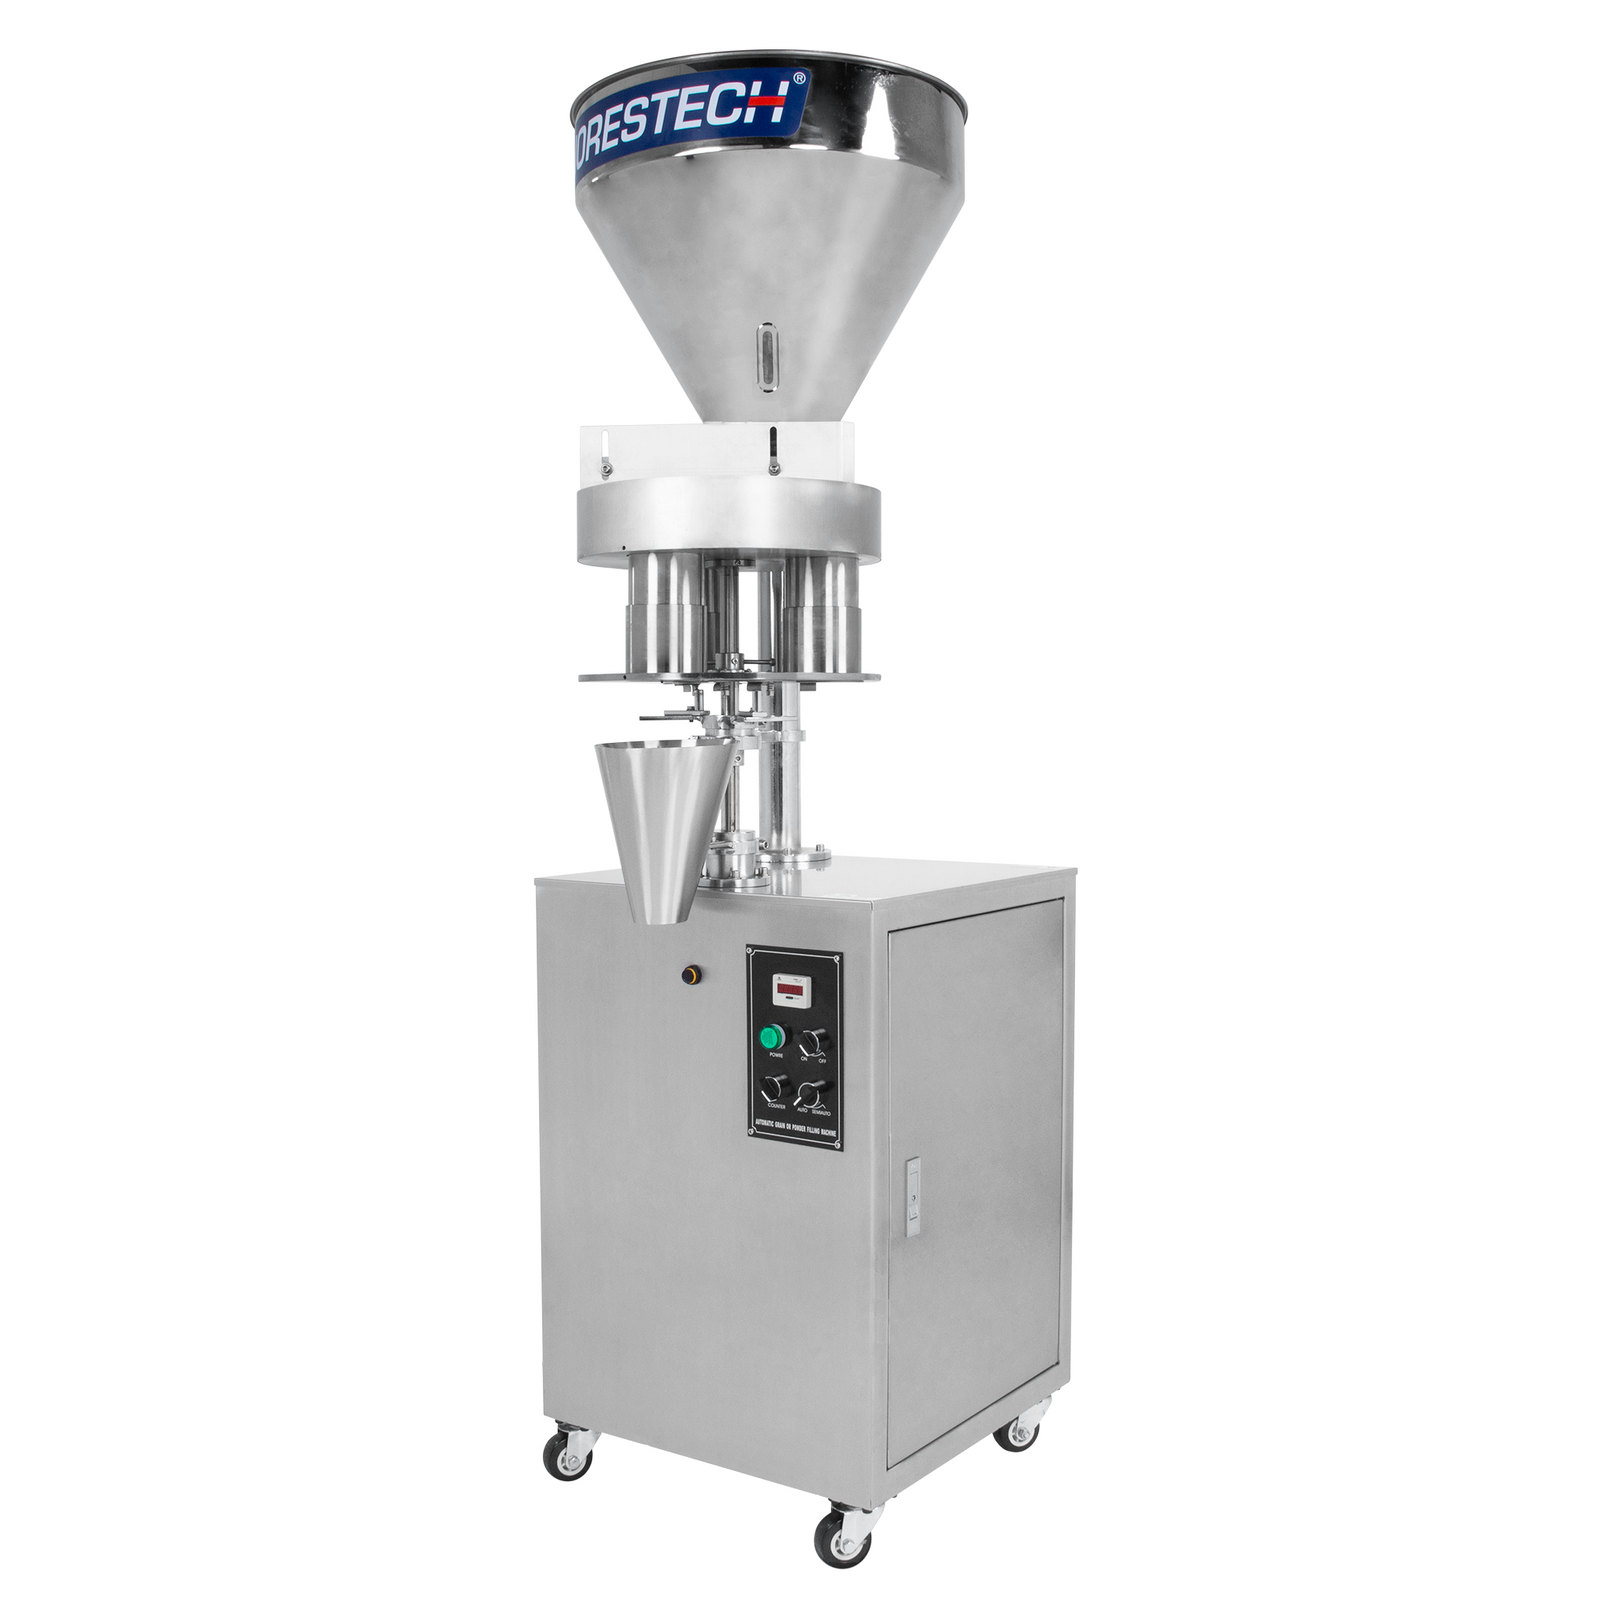 Stainless steel Jorestech semi automatic volumetric filler for free-flowing granular products in a diagonal view